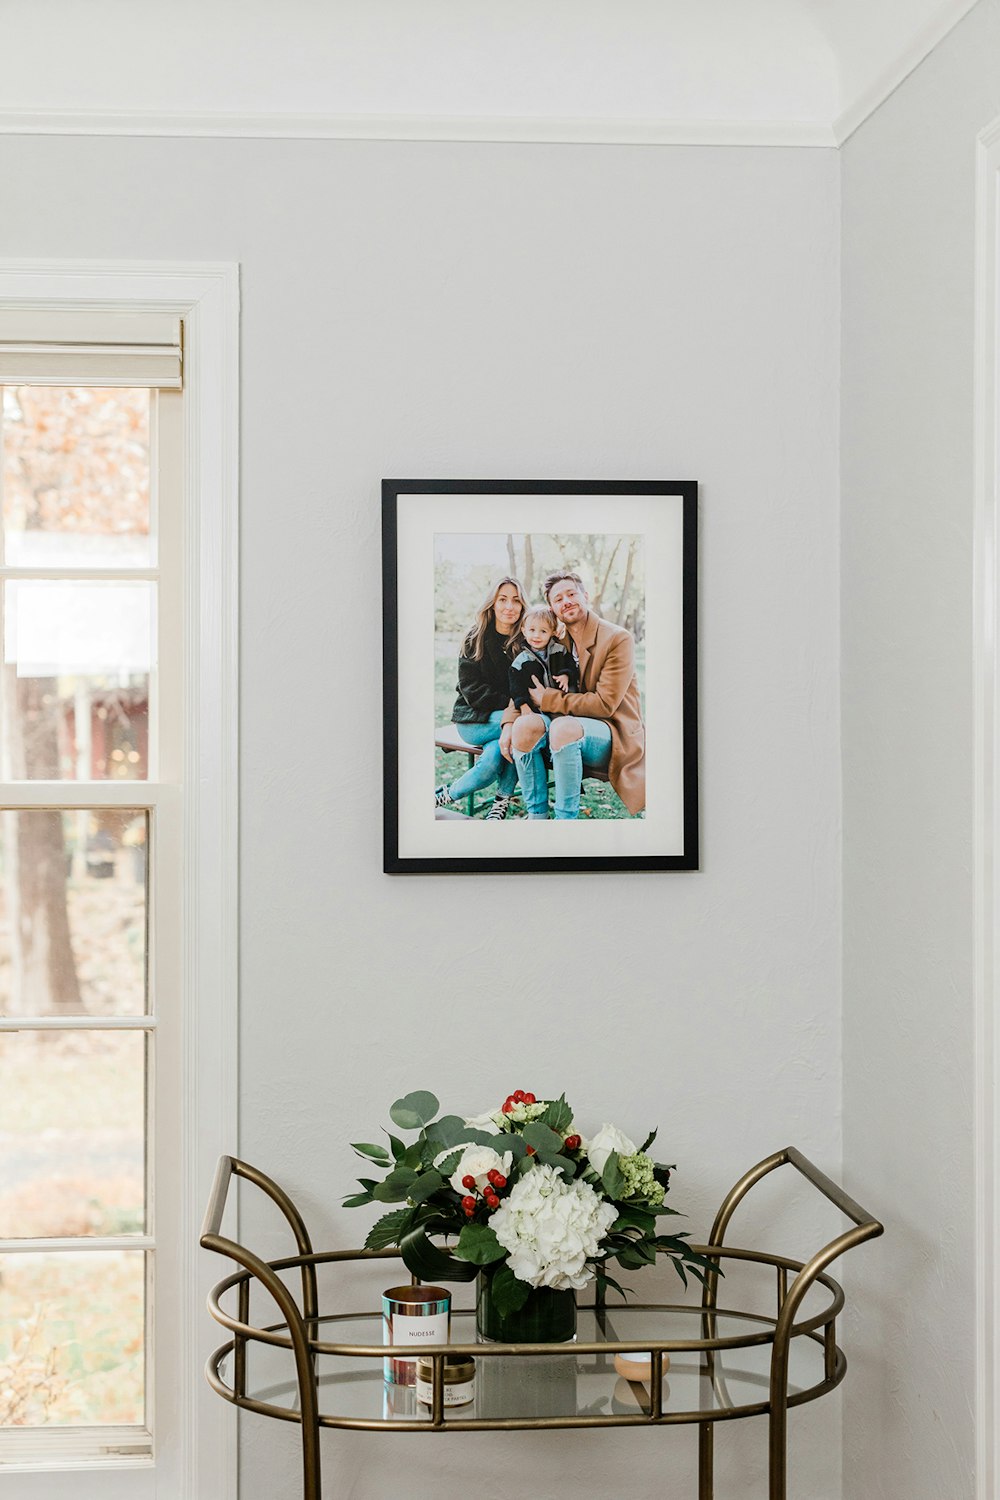 Family portrait in black framed print with mat hanging on wall by window